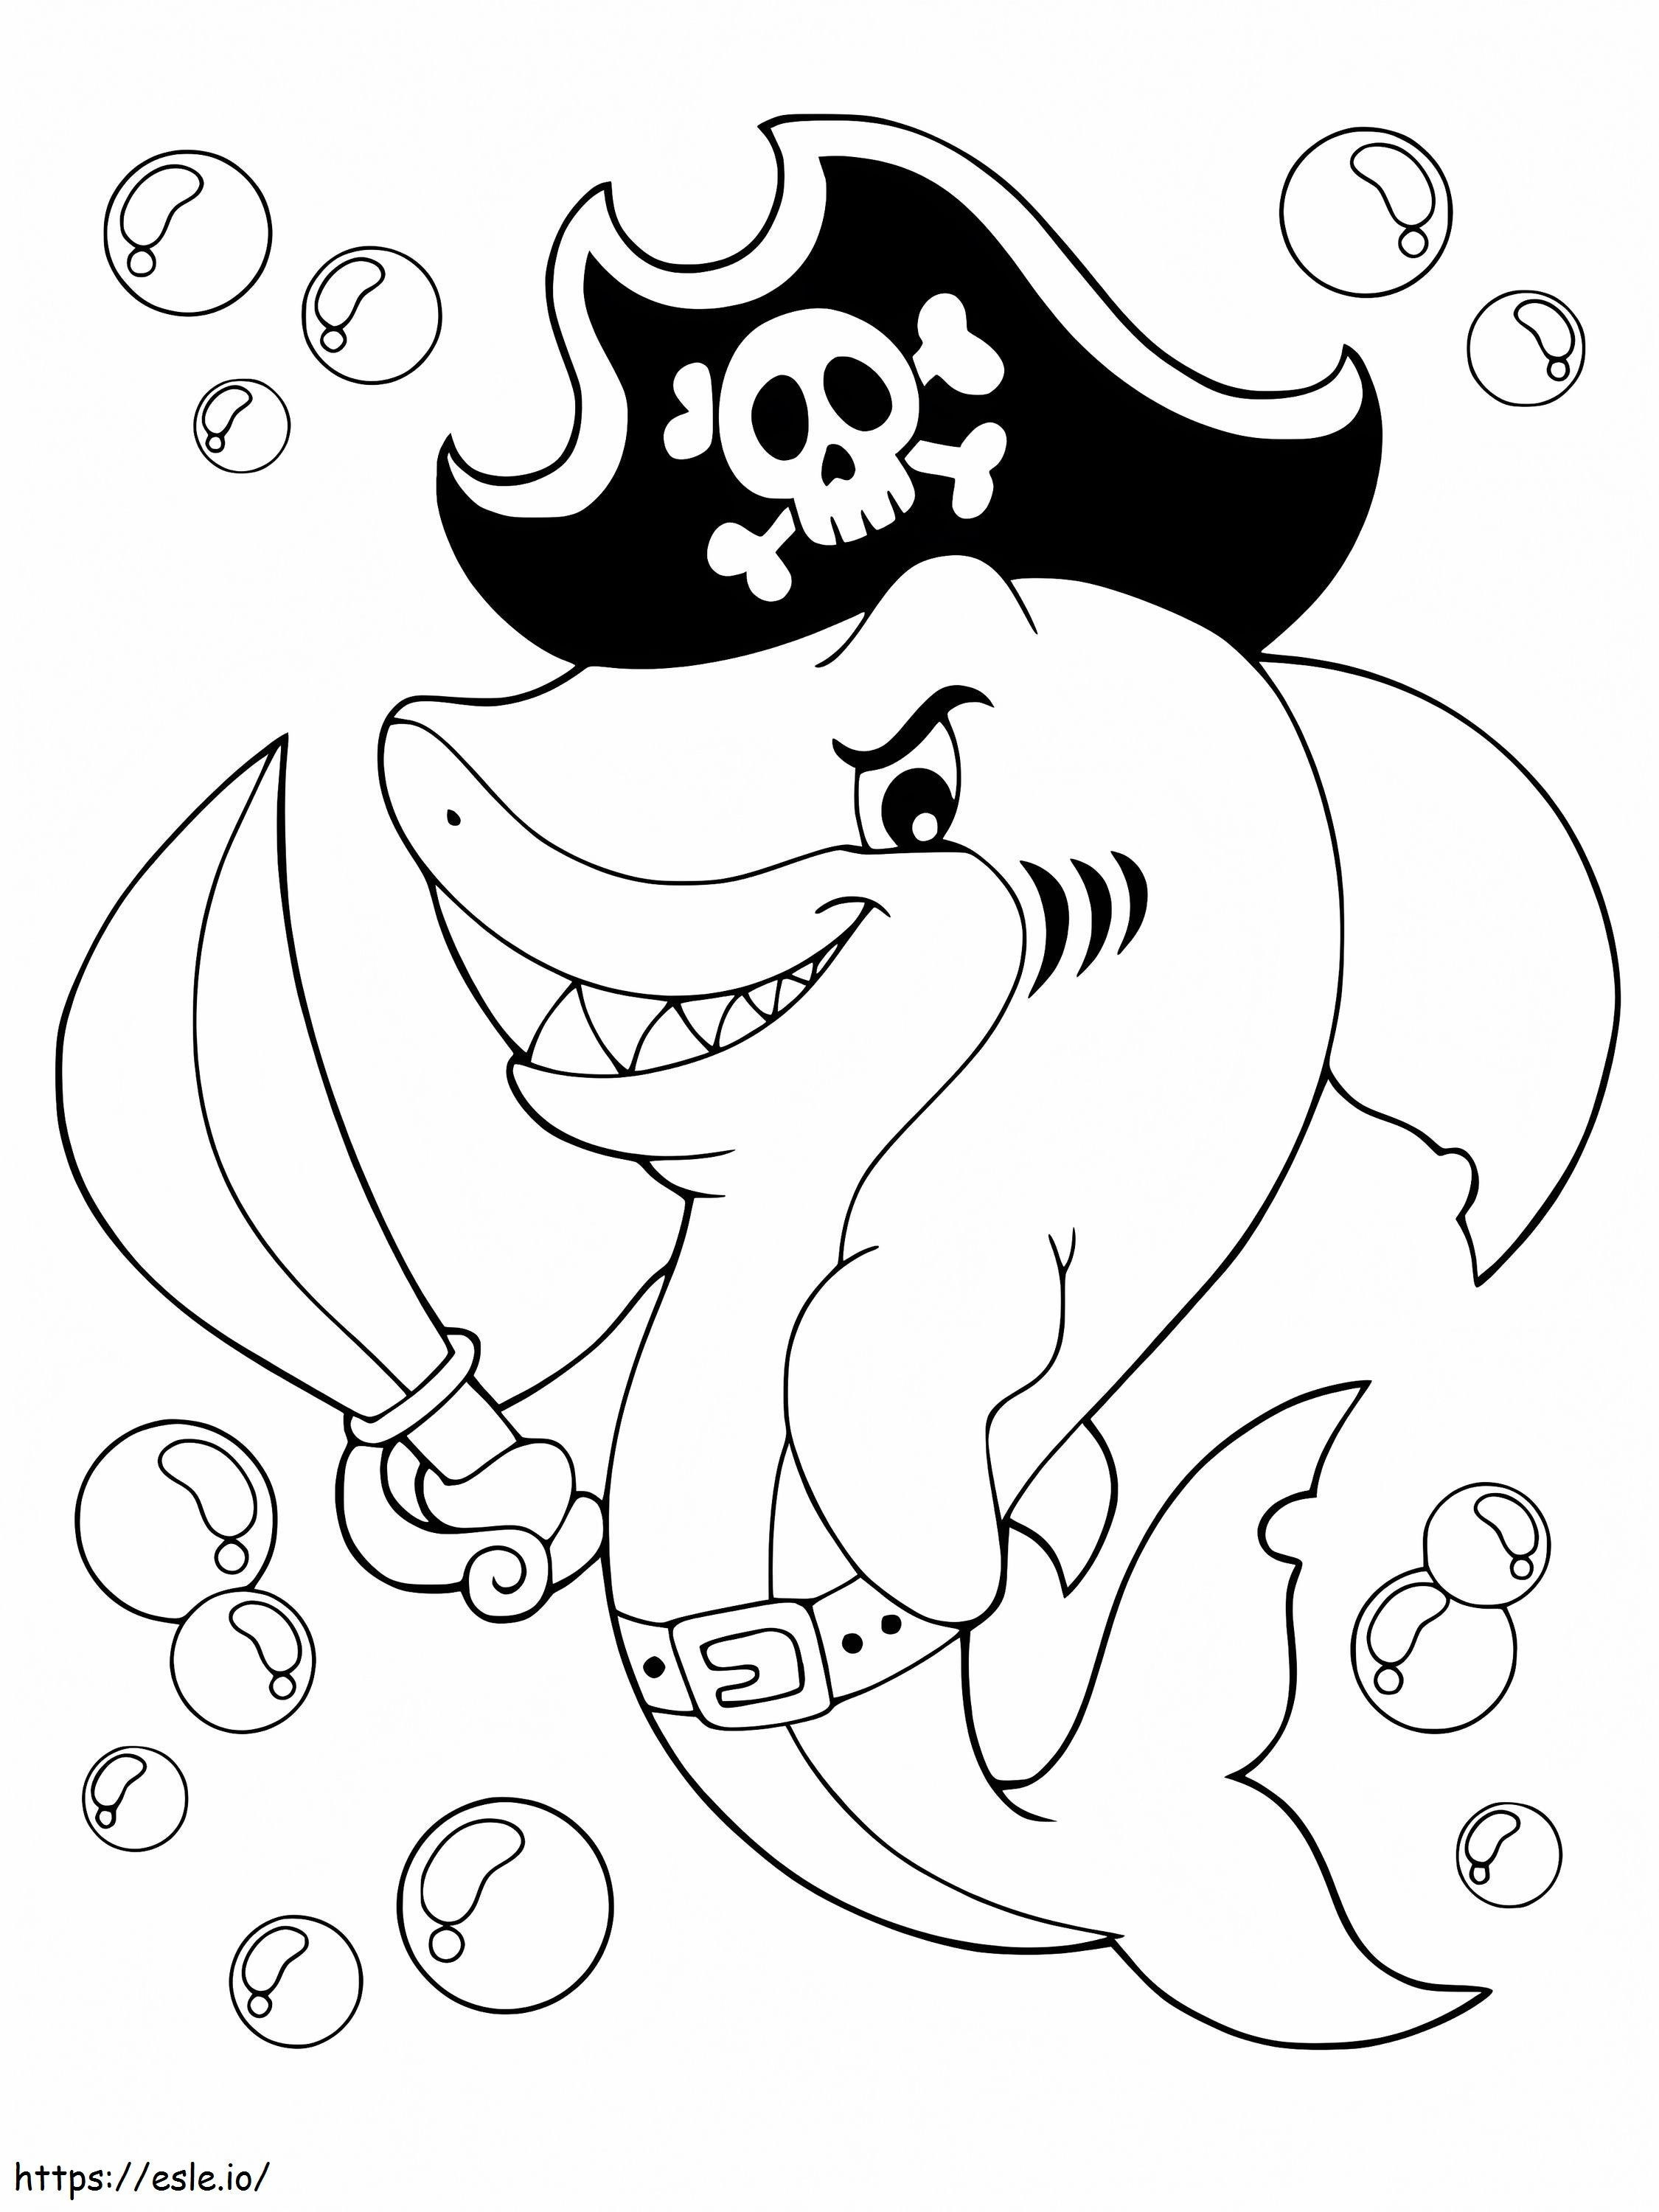 Pirate Shark coloring page